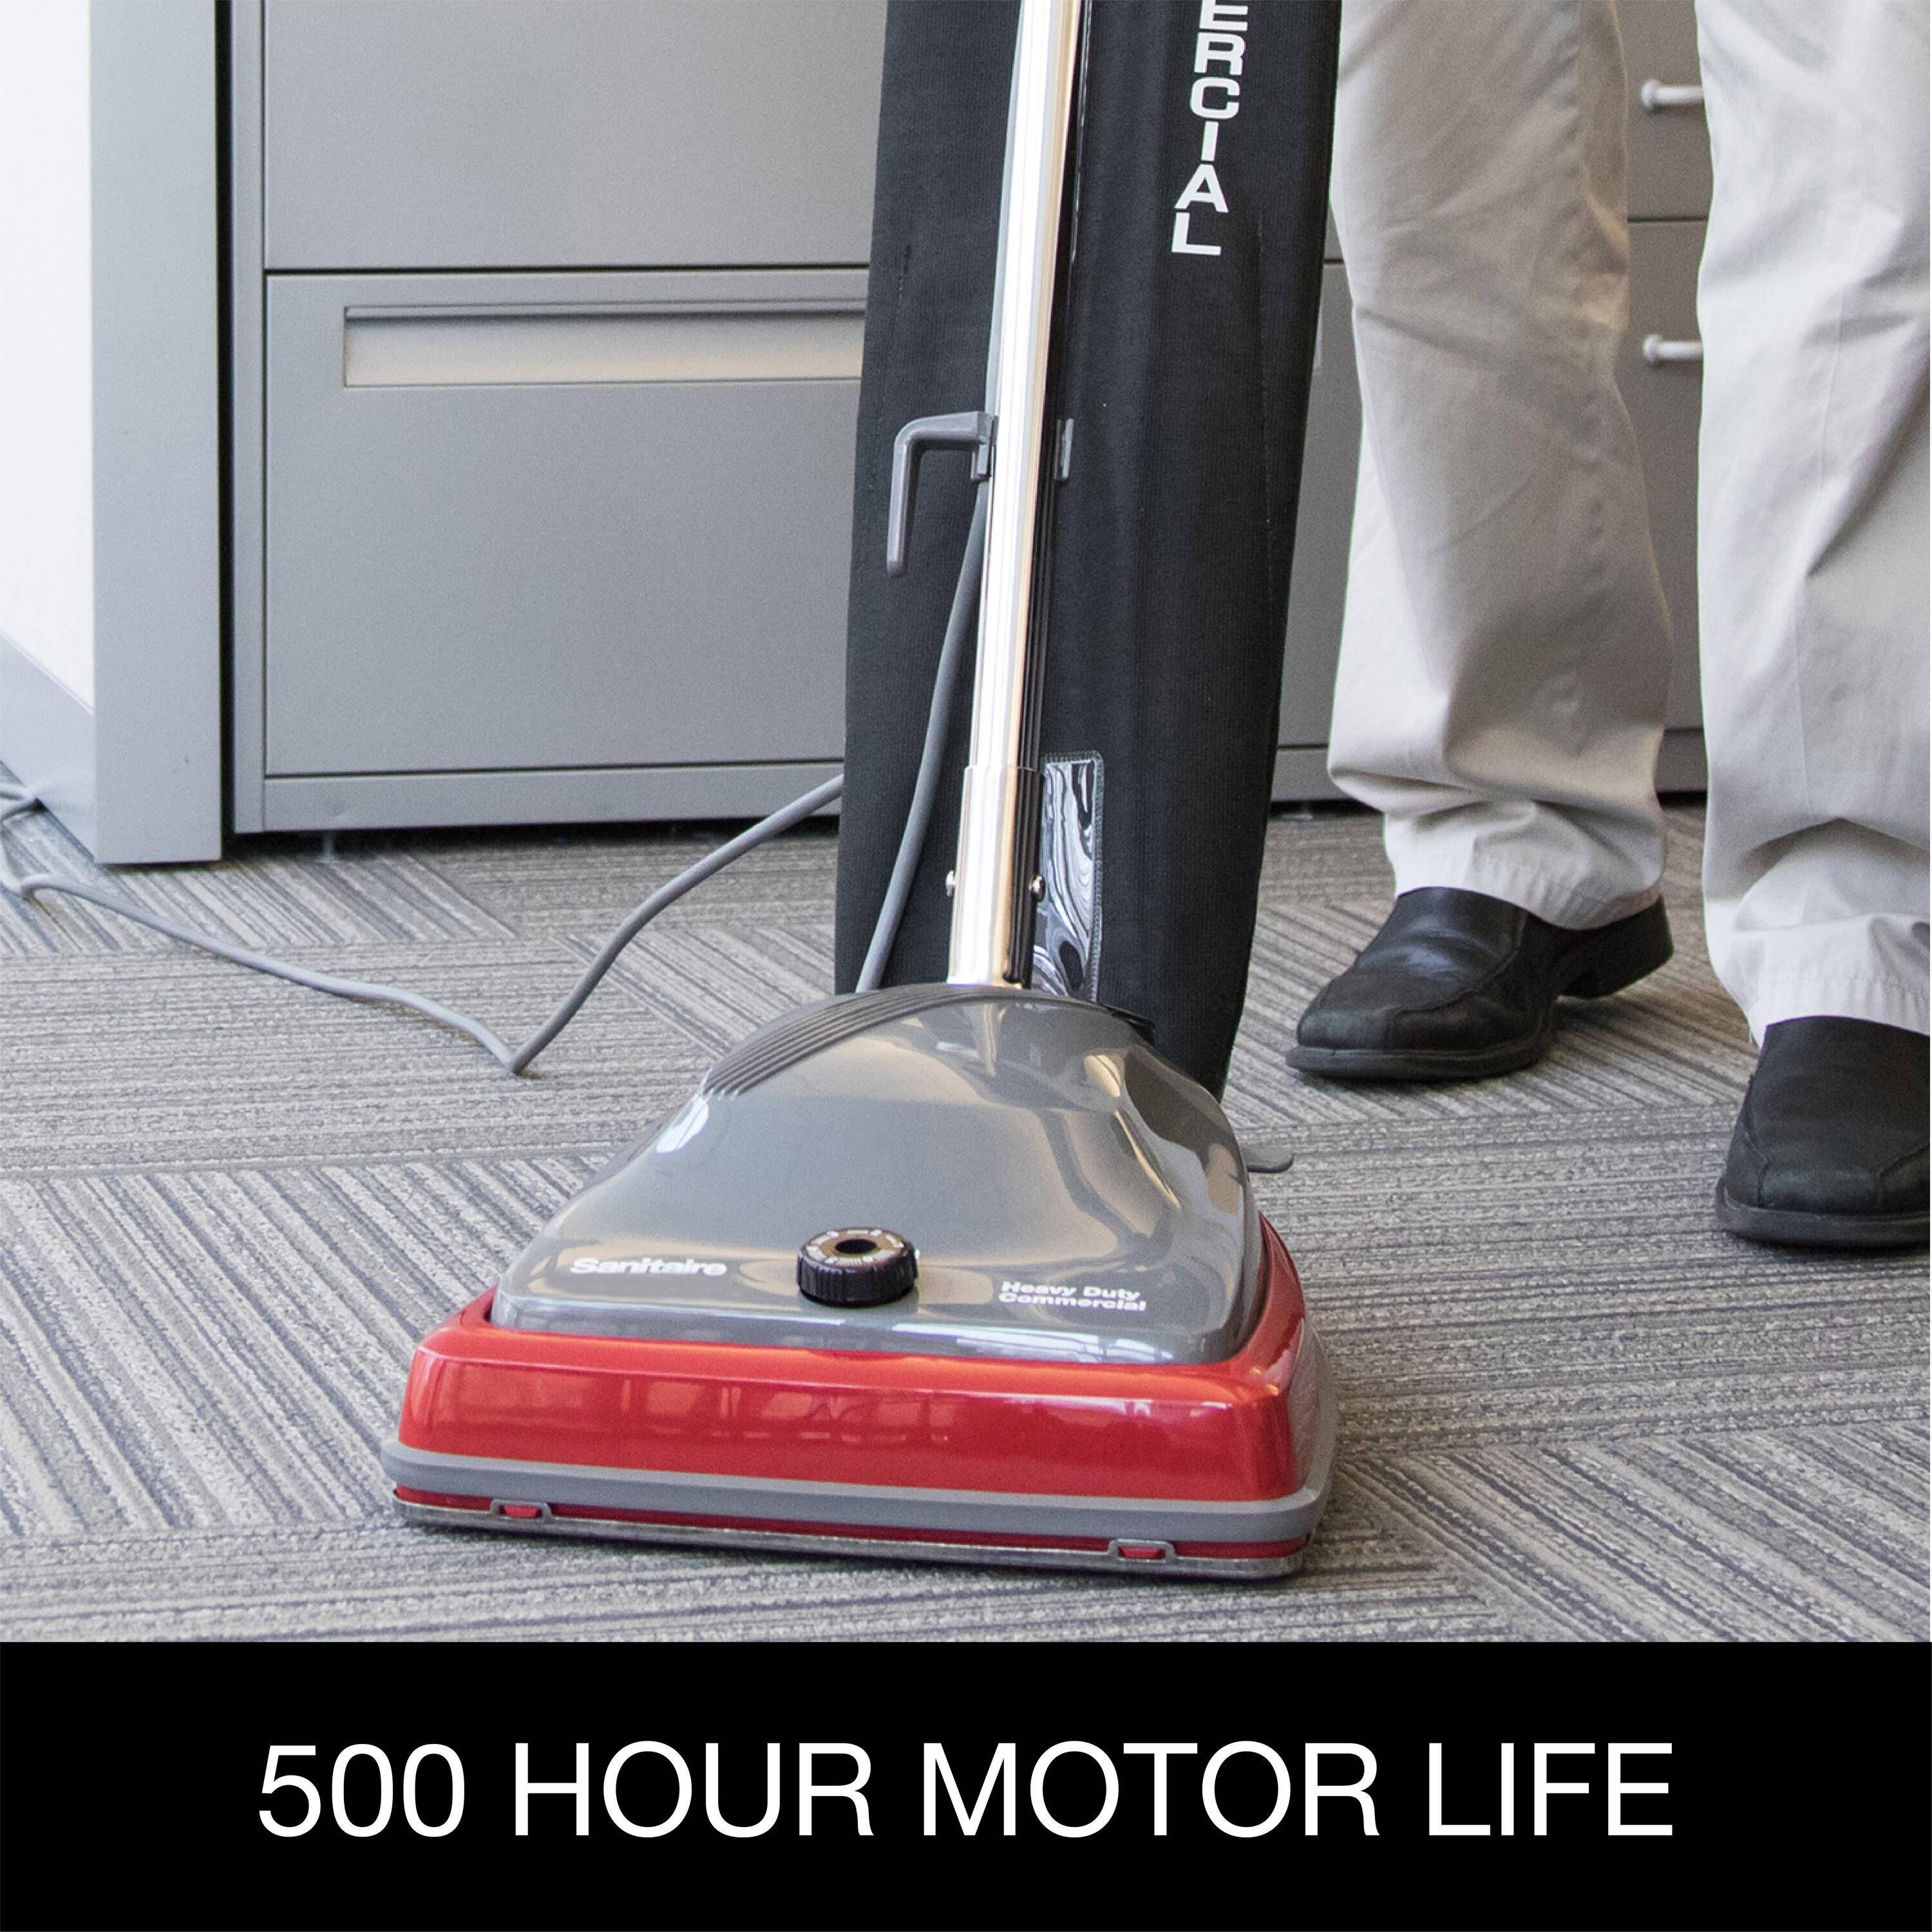 Carpet Cleaning Machines, Carpet Extractors, Portable and Spot Carpet  Cleaners from Sanitaire by Electrolux. 